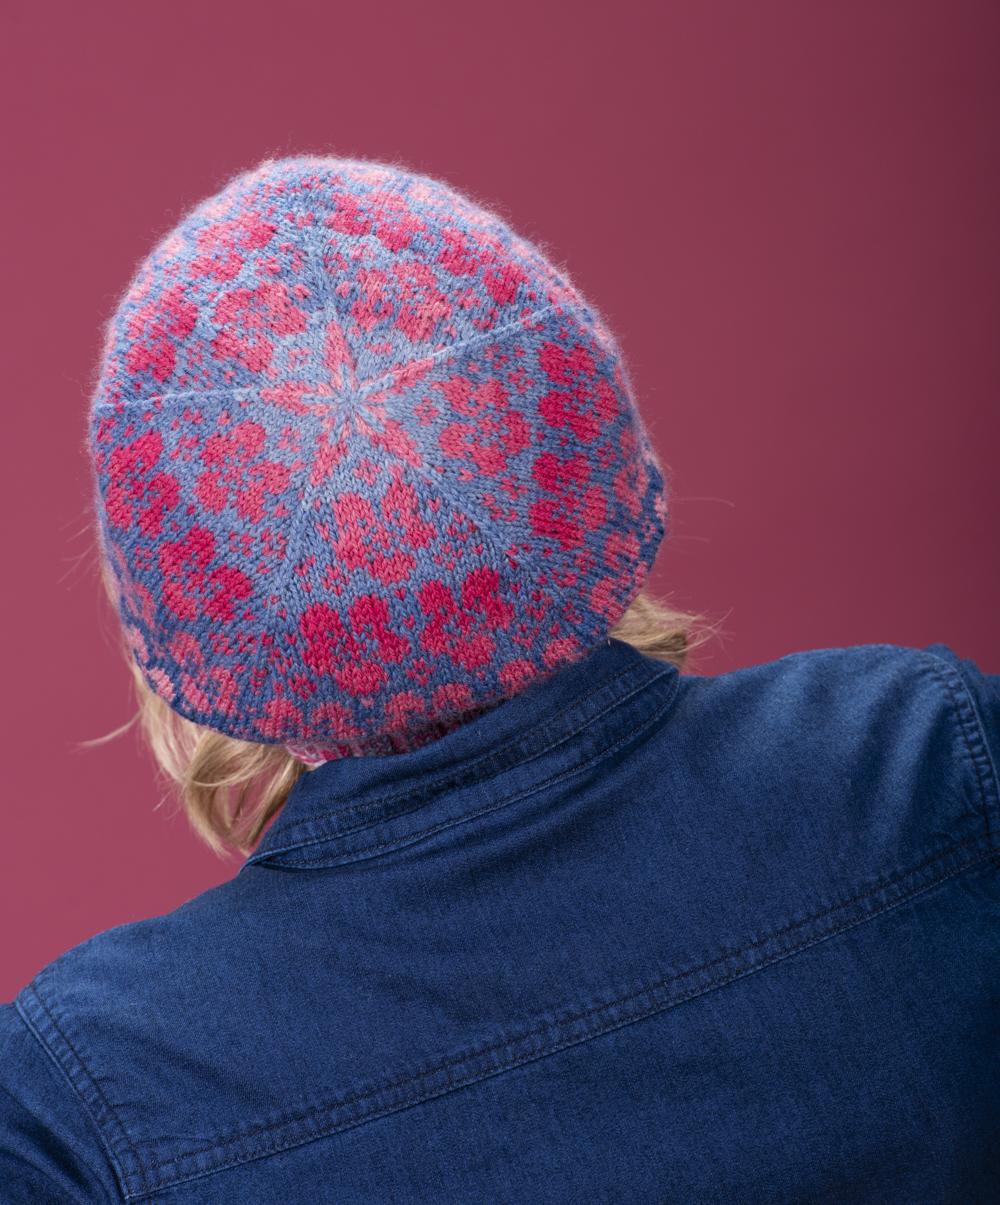 Heidi faces away from the camera so that we can only see the crisp patterning on the crown of the Flombre hat, which stands out as a geometric pink form against a blue background; the background of the photo is pink and Heidi wears a deep blue denim dress